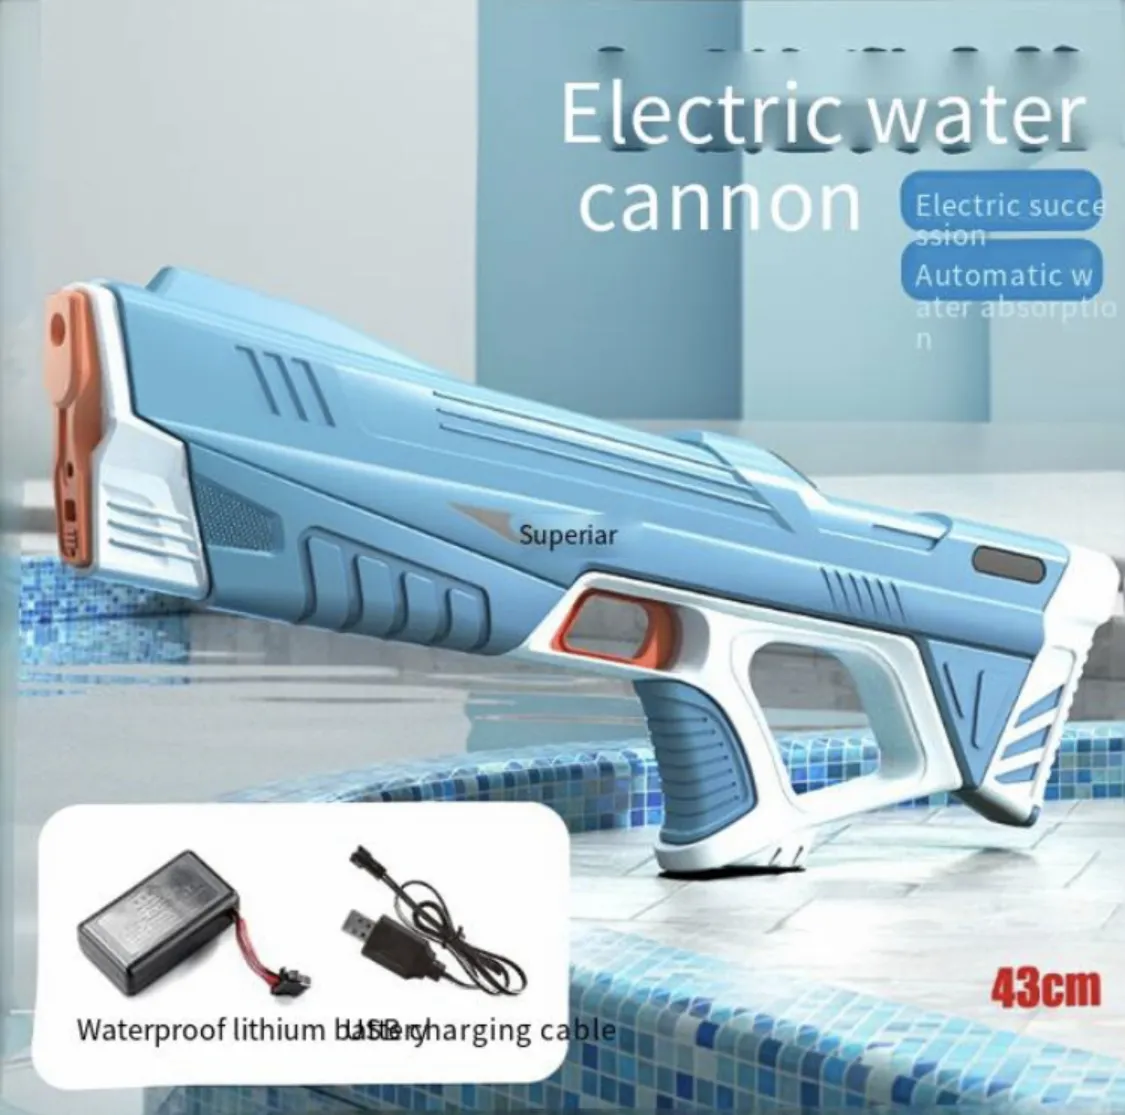 Summer Hot Selling Songkran Fast Delivery 8-10m long Electric Water Gun